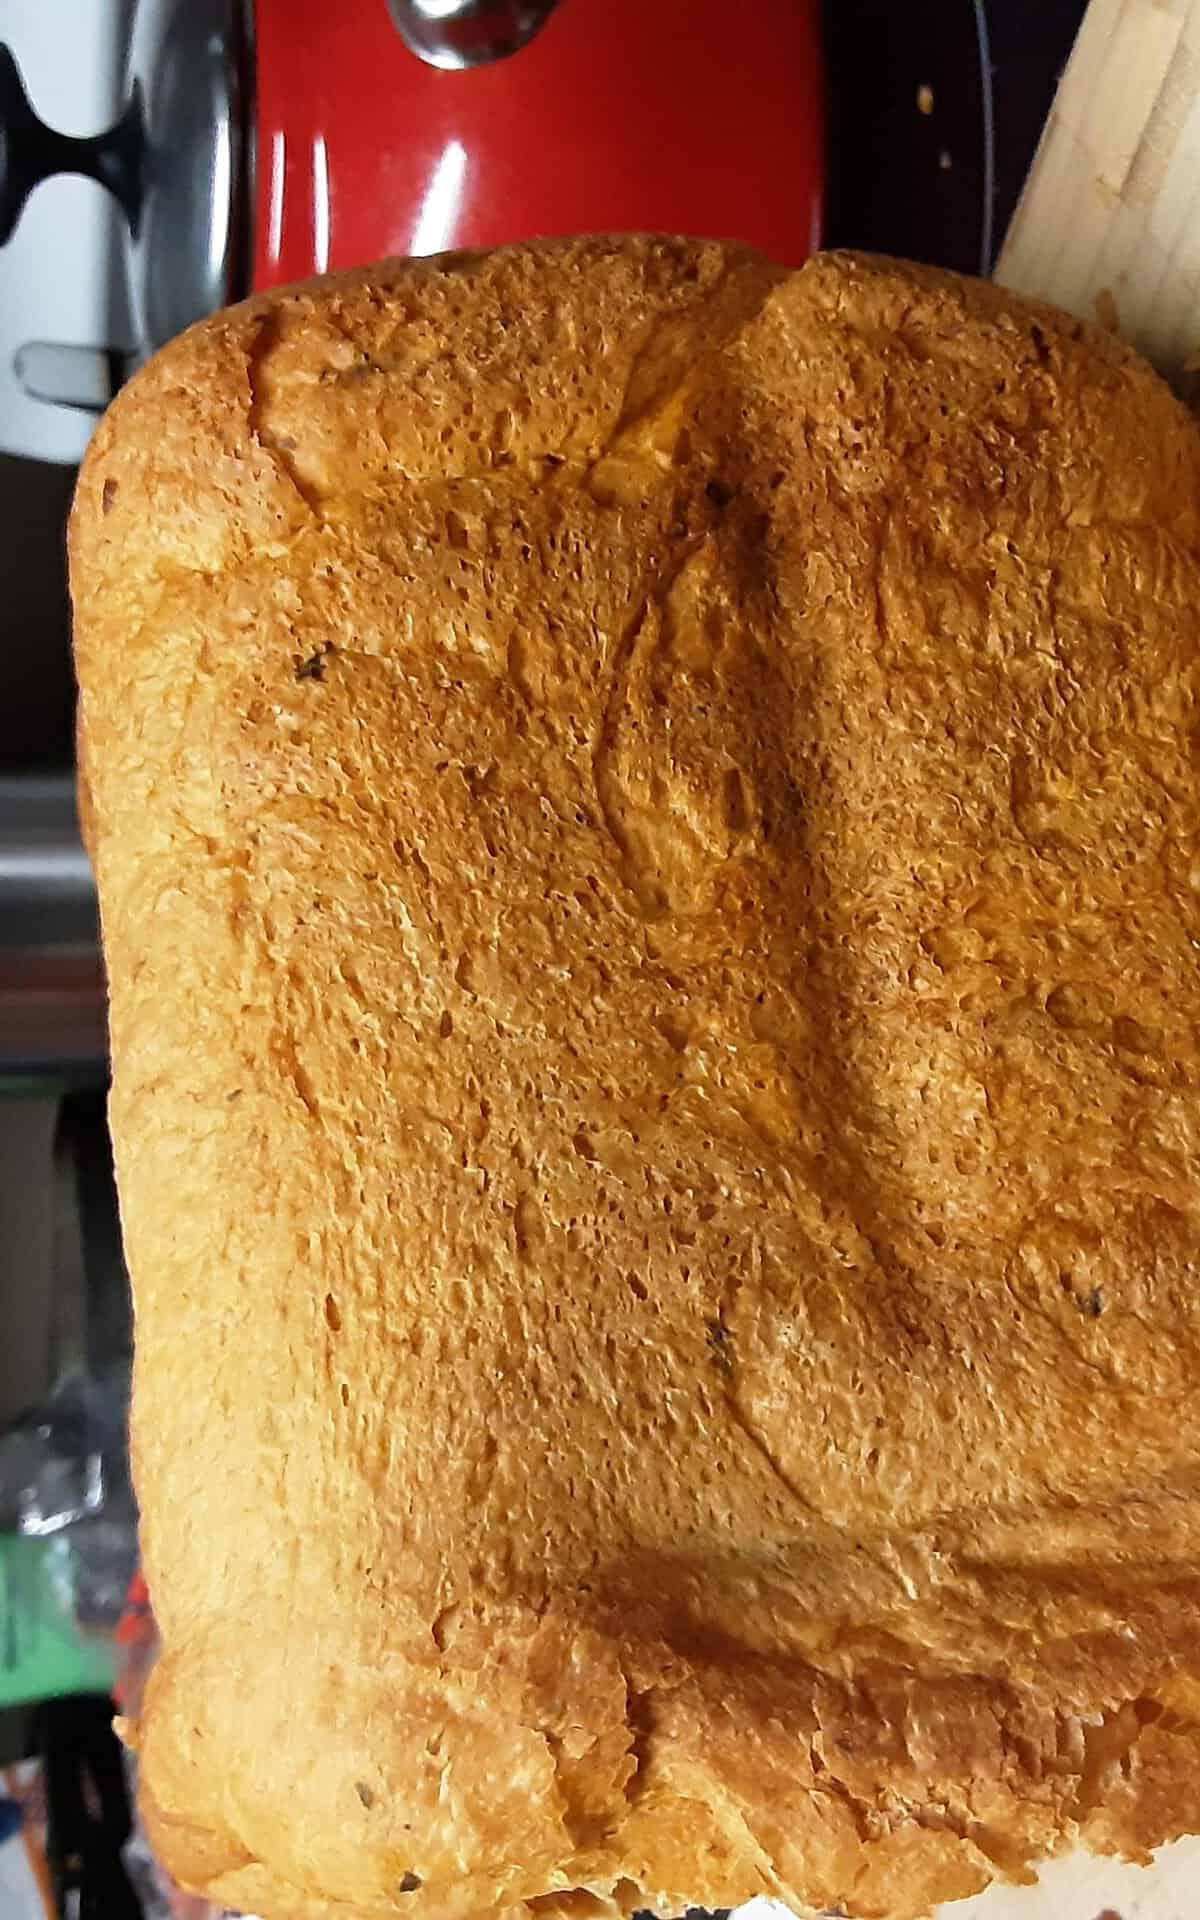  The aroma of freshly baked Cajun bread is simply irresistible.